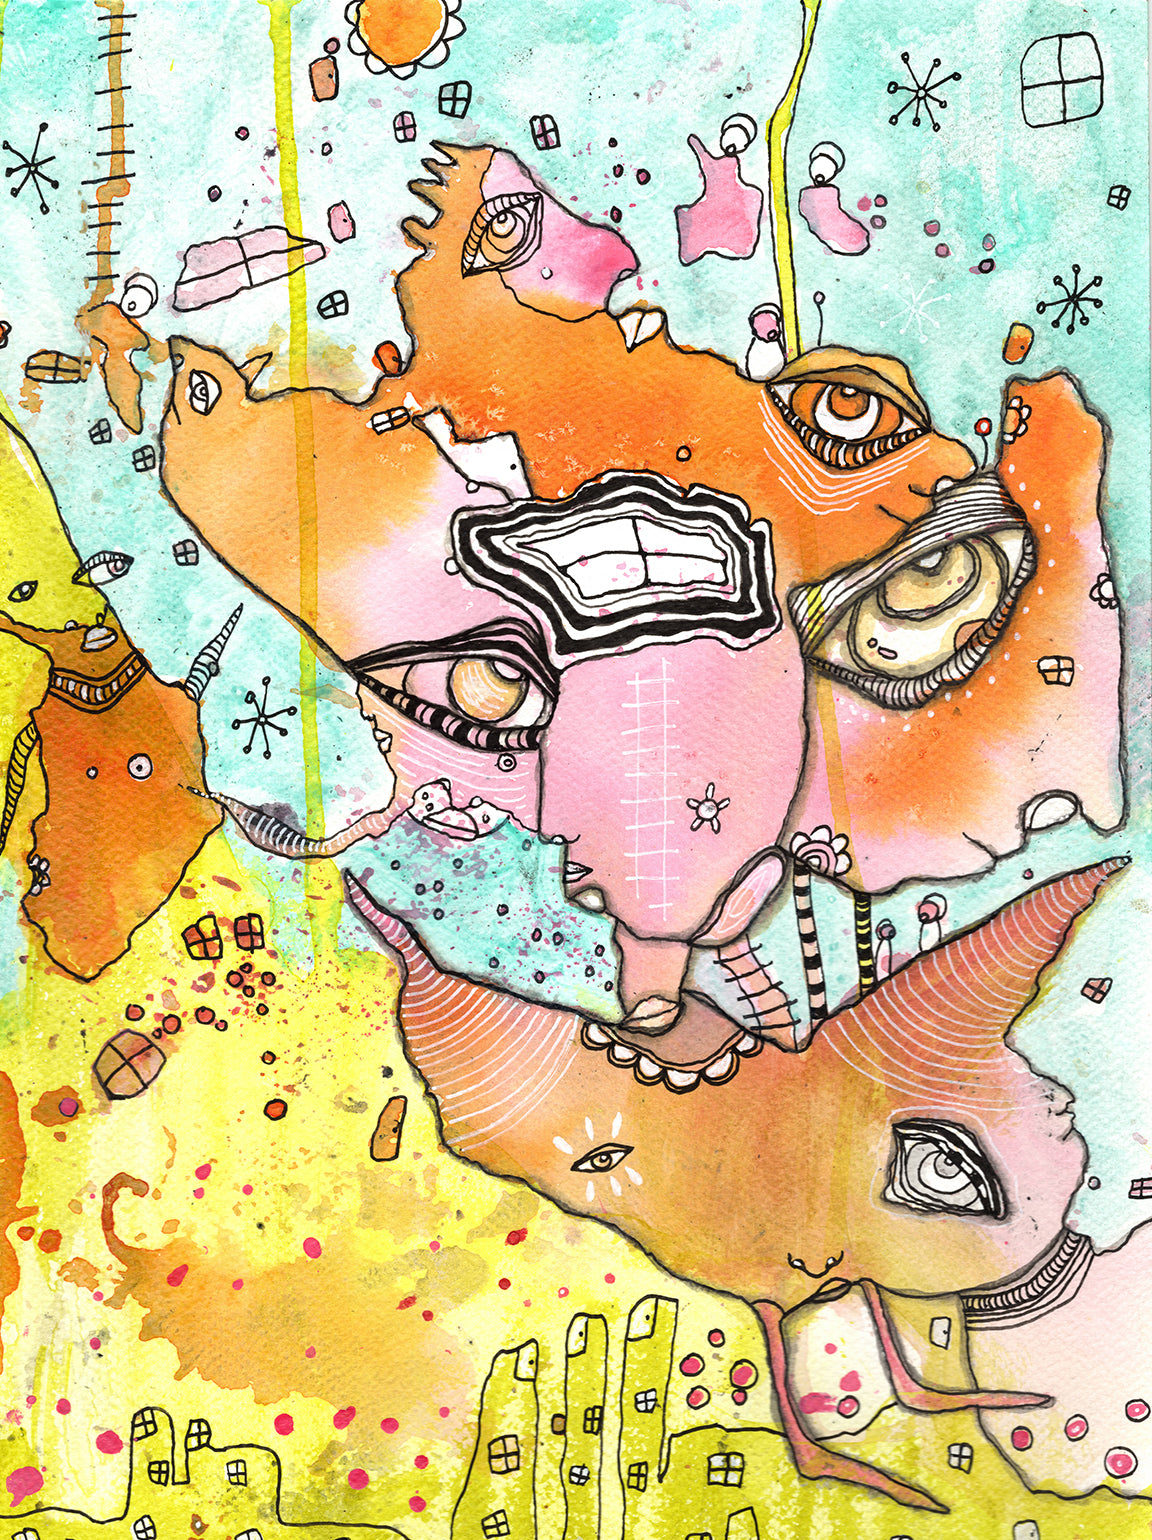 "Just Fly Away" Original Mixed Media art on Watercolor Paper